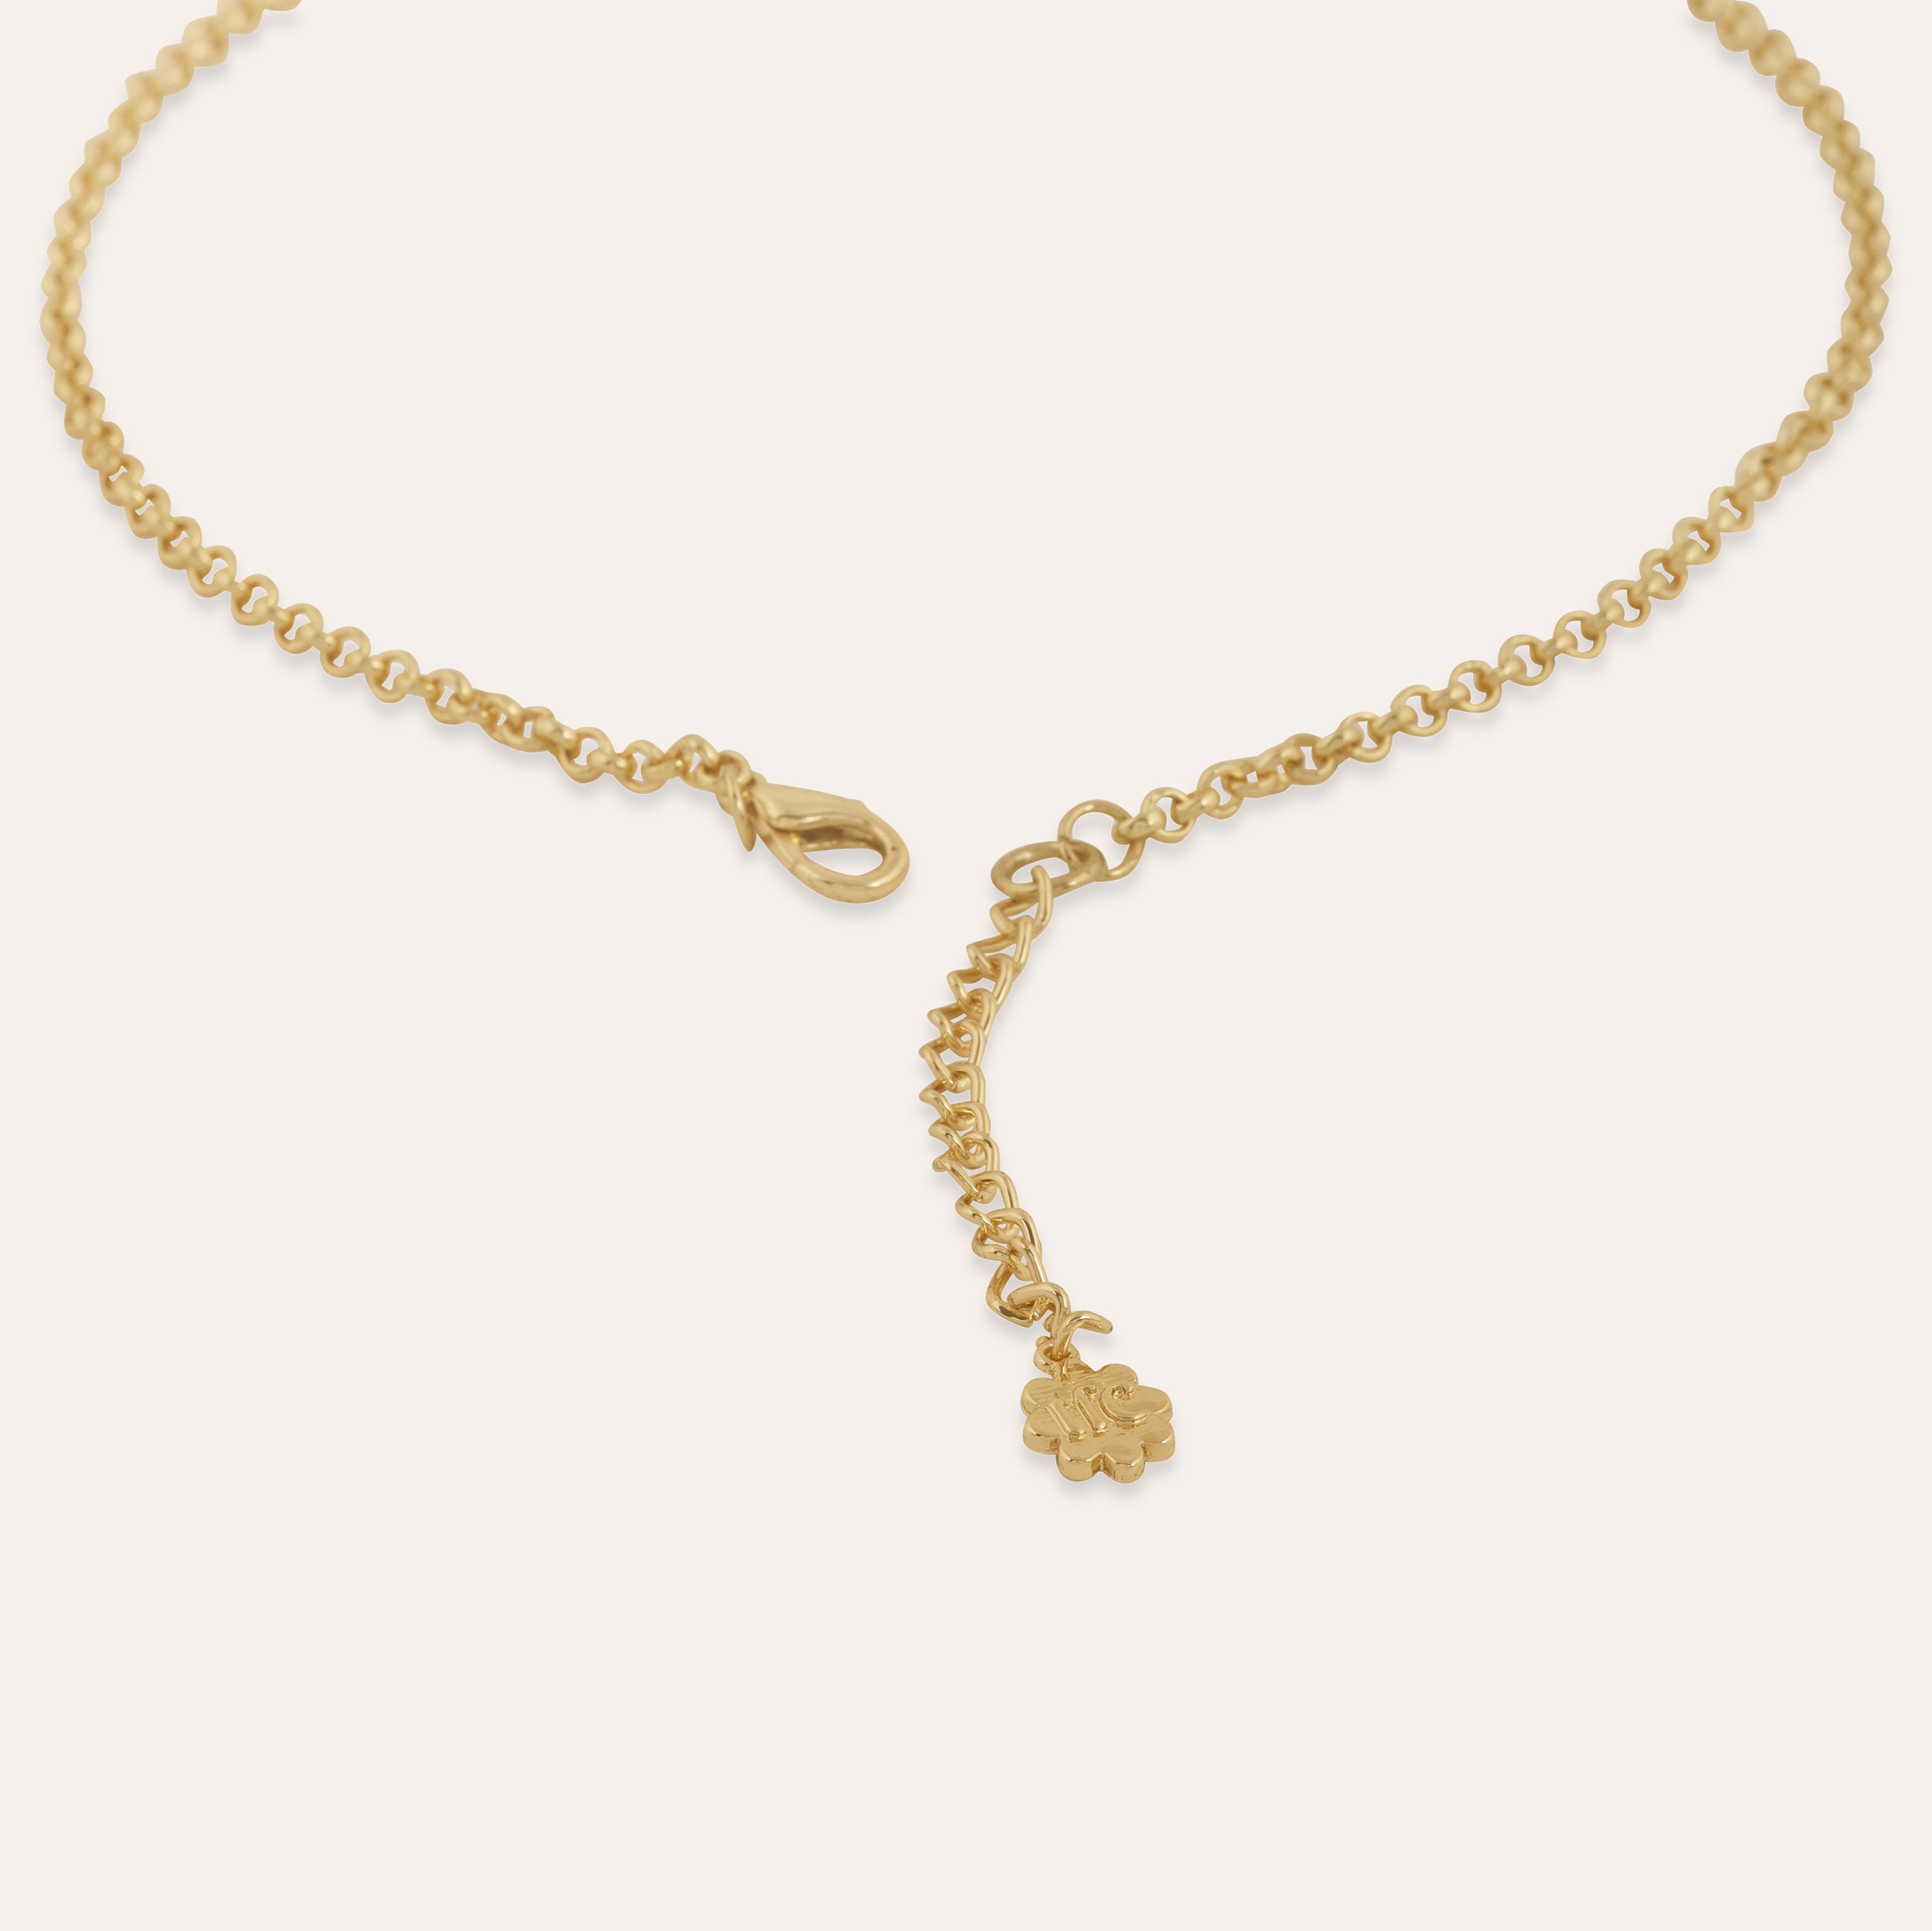 TFC Floral Pendant Gold Plated Necklace-Enhance your elegance with our collection of gold-plated necklaces for women. Choose from stunning pendant necklaces, chic choker necklaces, and trendy layered necklaces. Our sleek and dainty designs are both affordable and anti-tarnish, ensuring lasting beauty. Enjoy the cheapest fashion jewellery, lightweight and stylish- only at The Fun Company